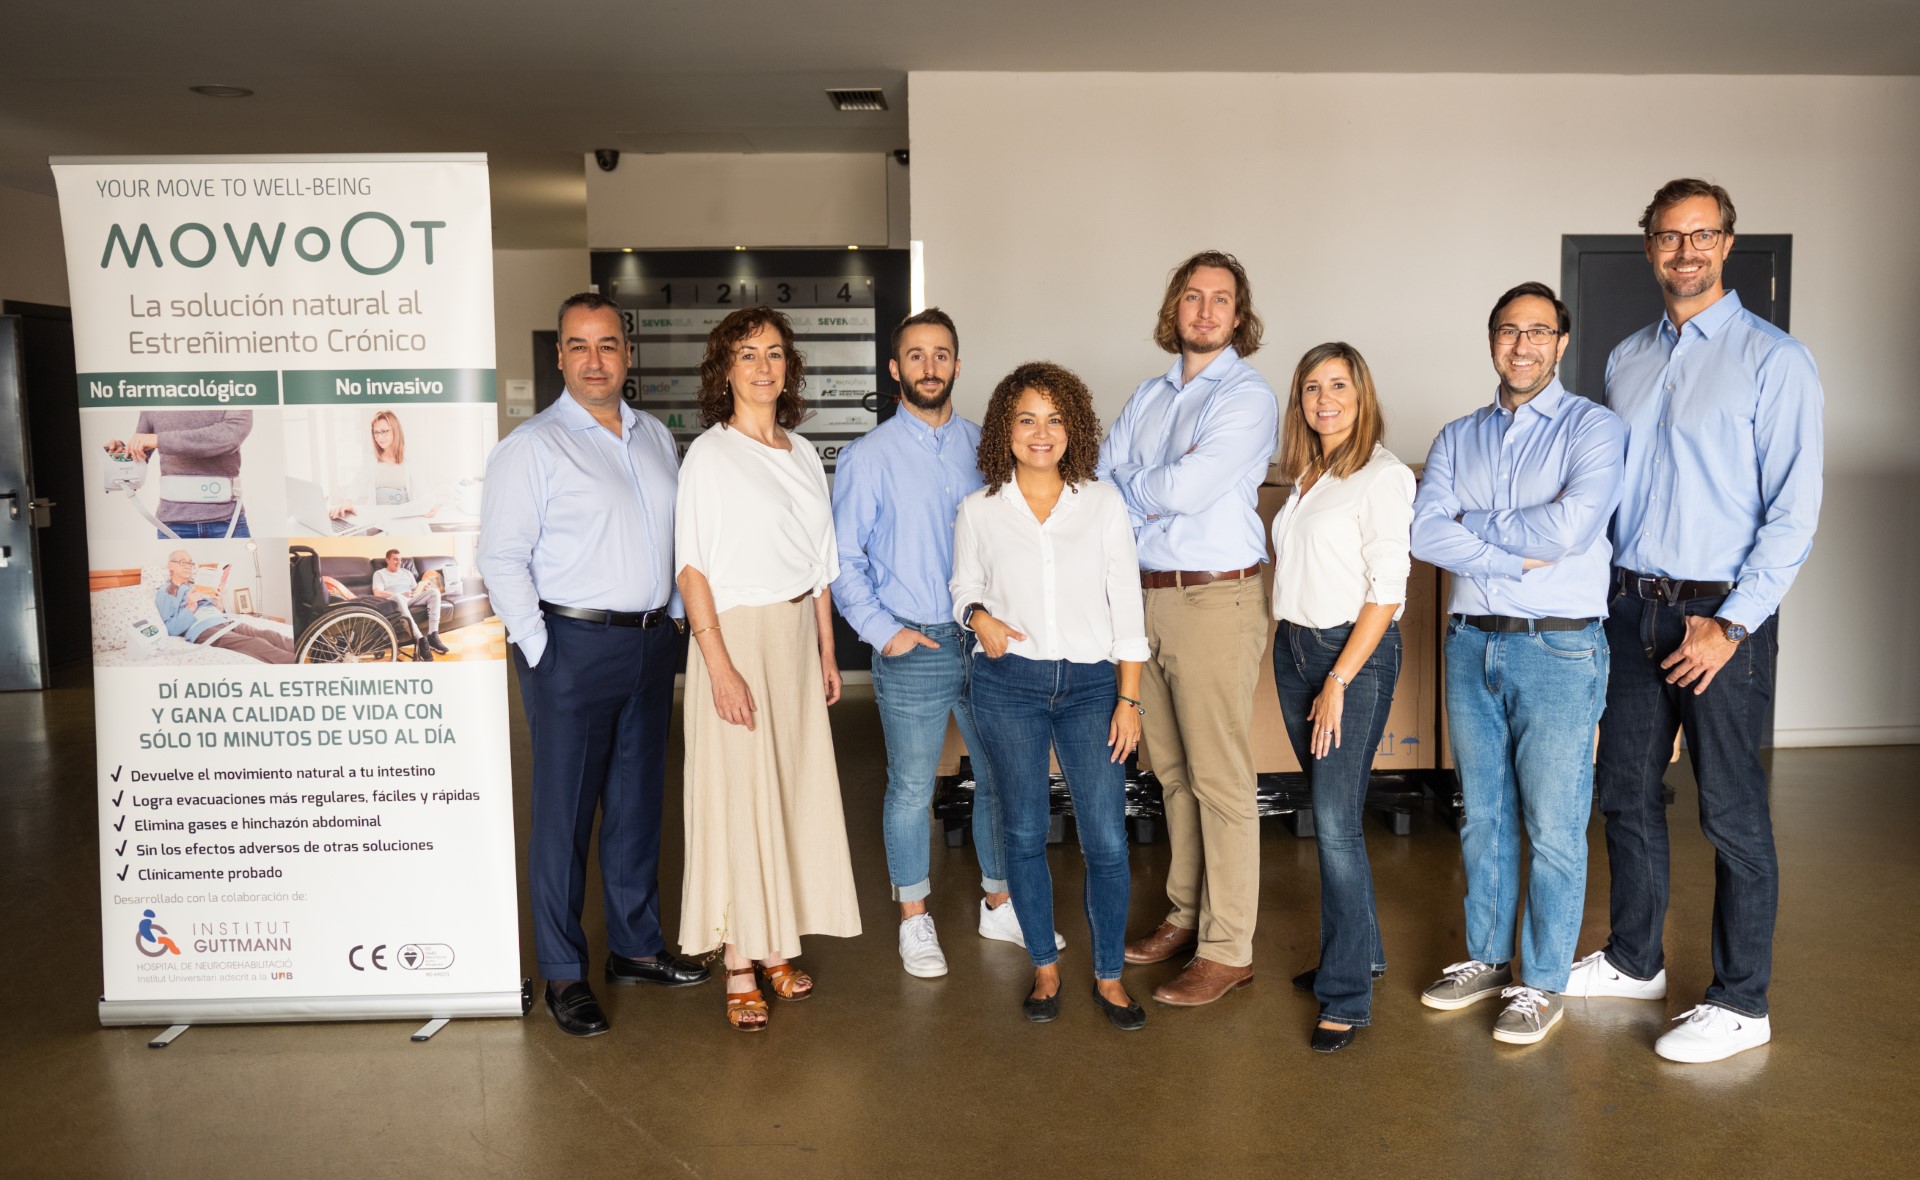 MOWOOT secures over €2 million from Next Generation funds